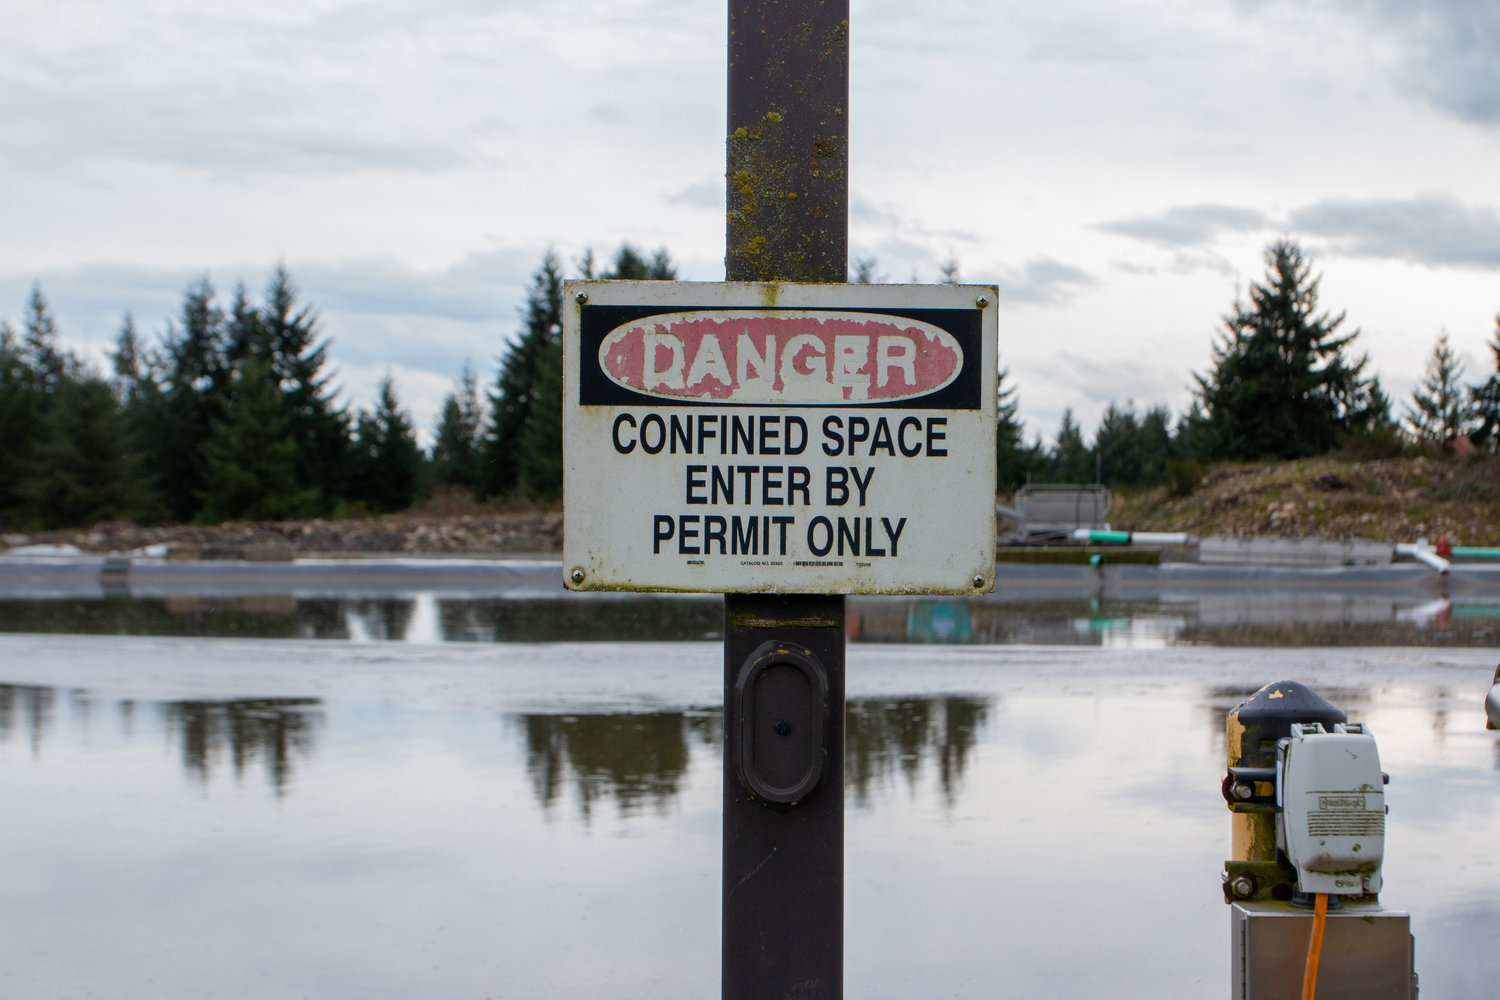 This lagoon belongs to the Tenino Wastewater Treatment Plant.